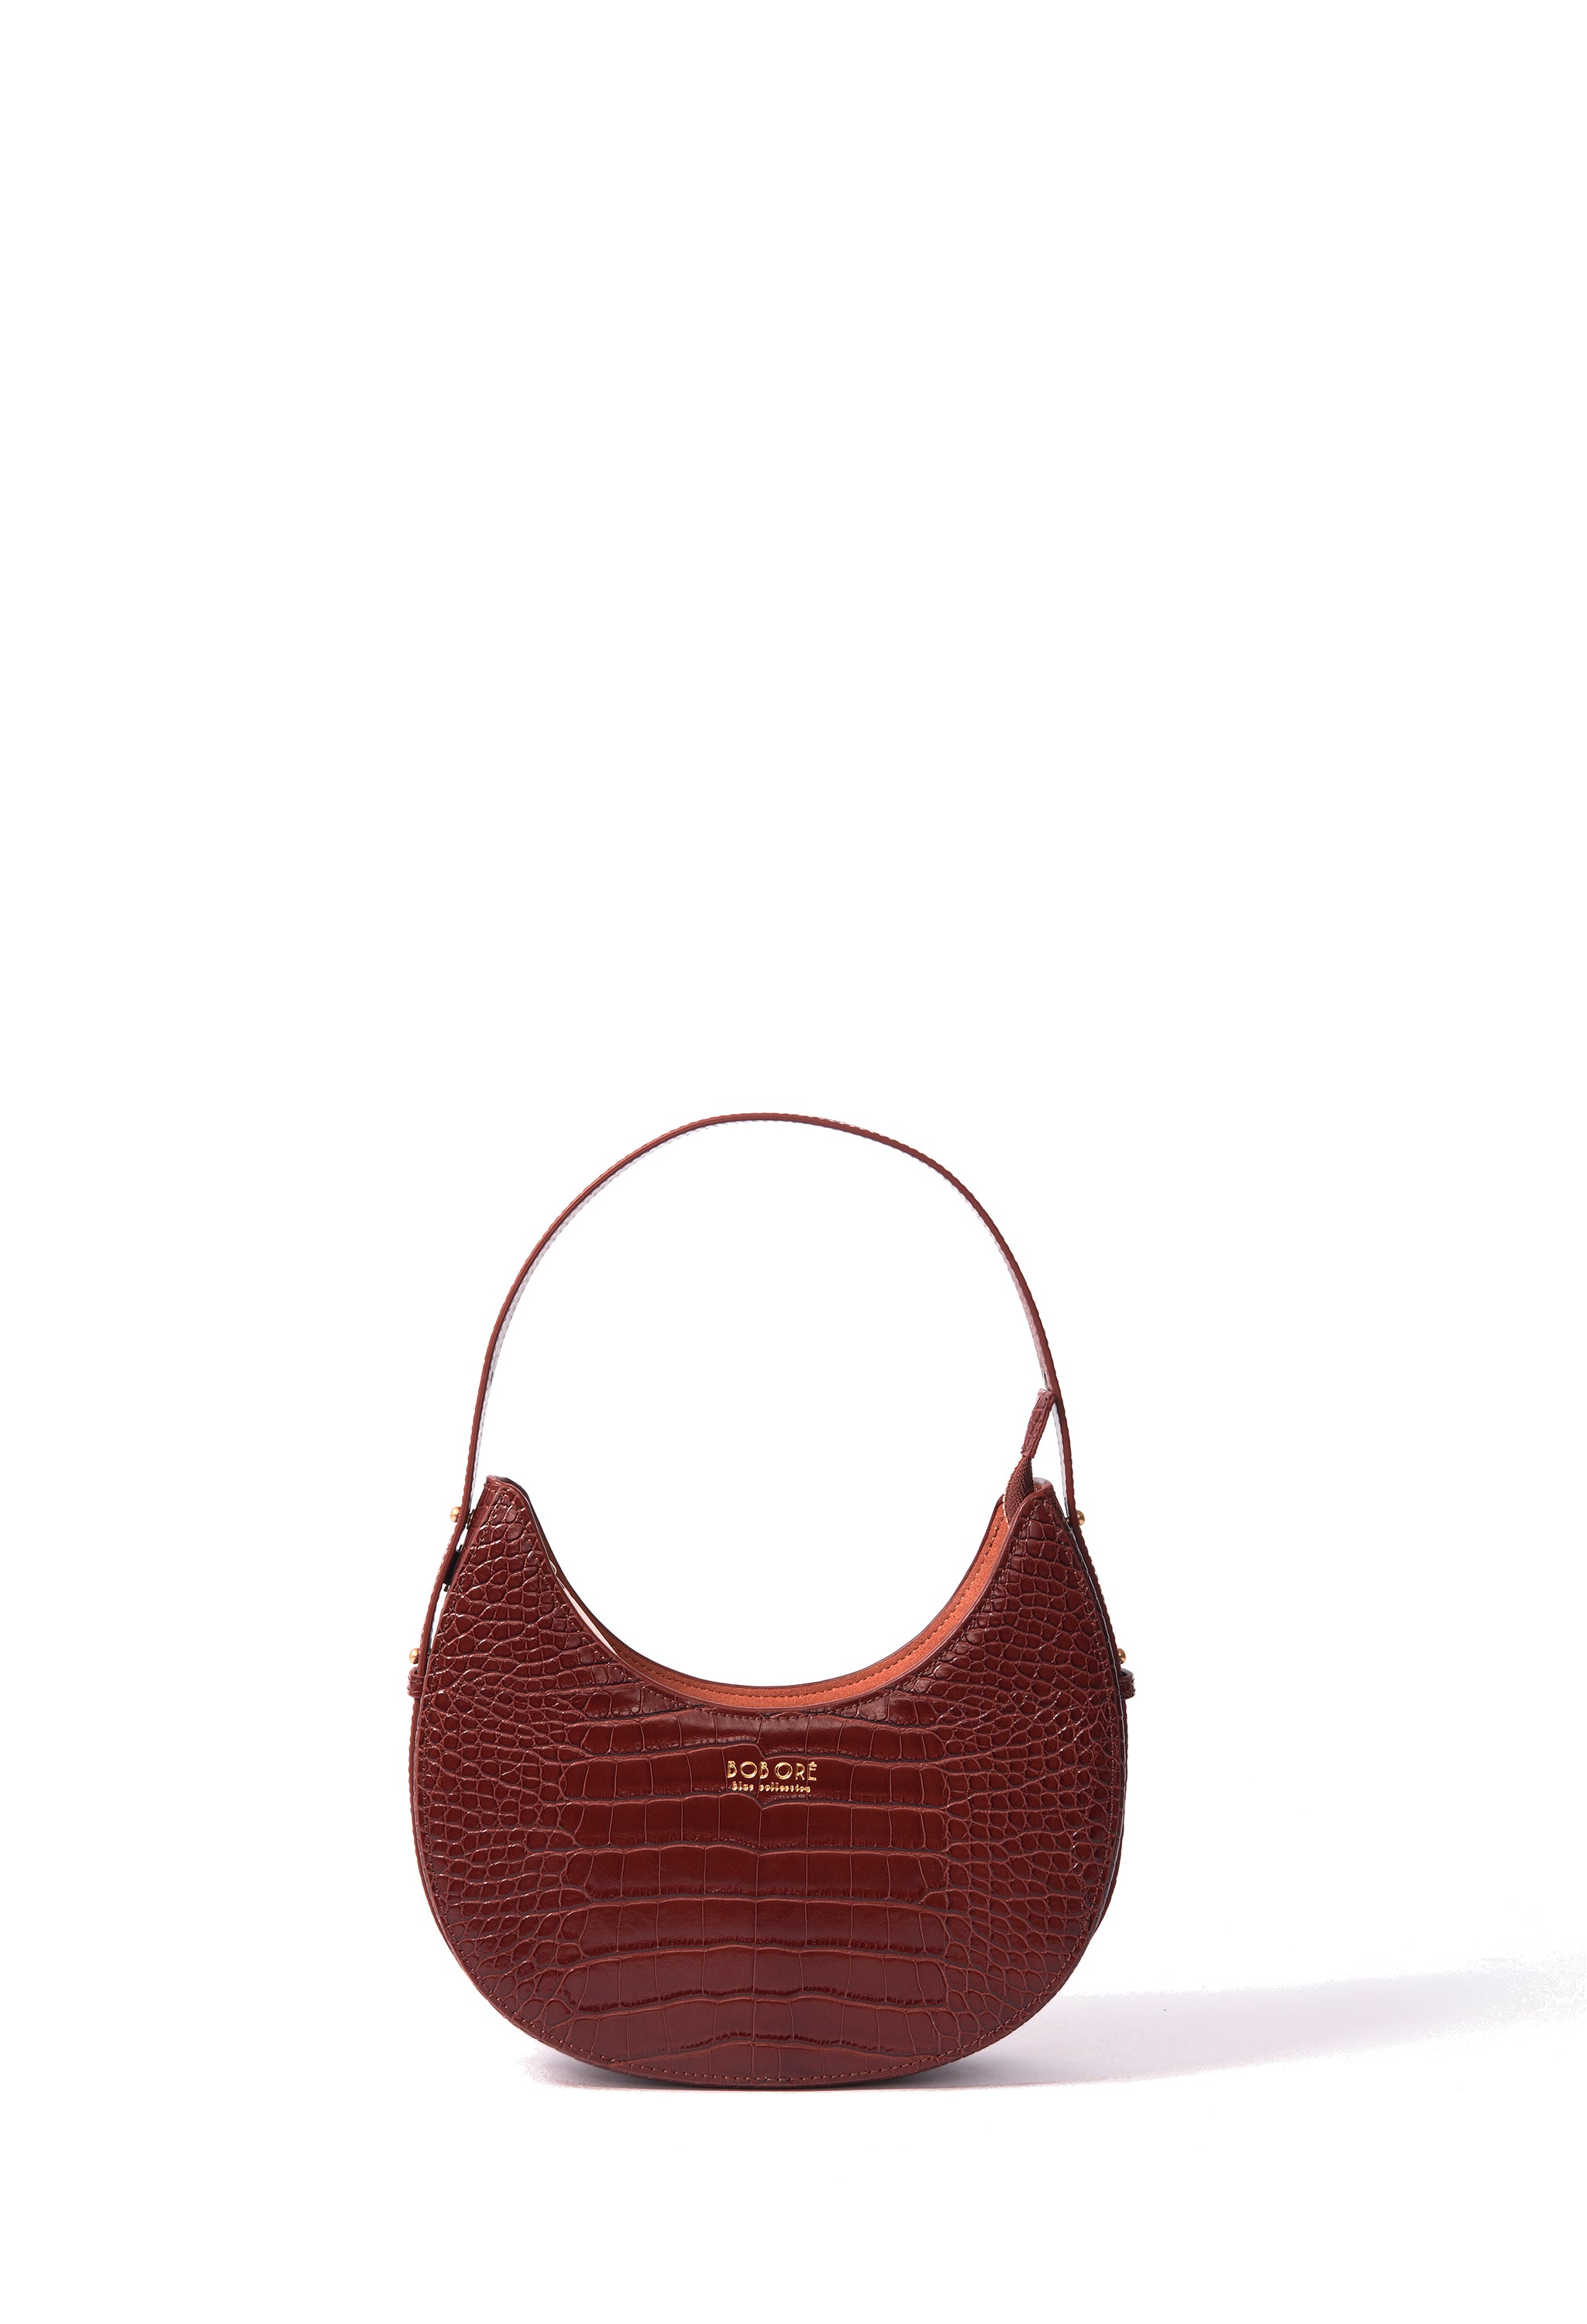 Naomi Moon Bag in croco embossed leather, Caramel BOB ORE blue collection on sale 2022